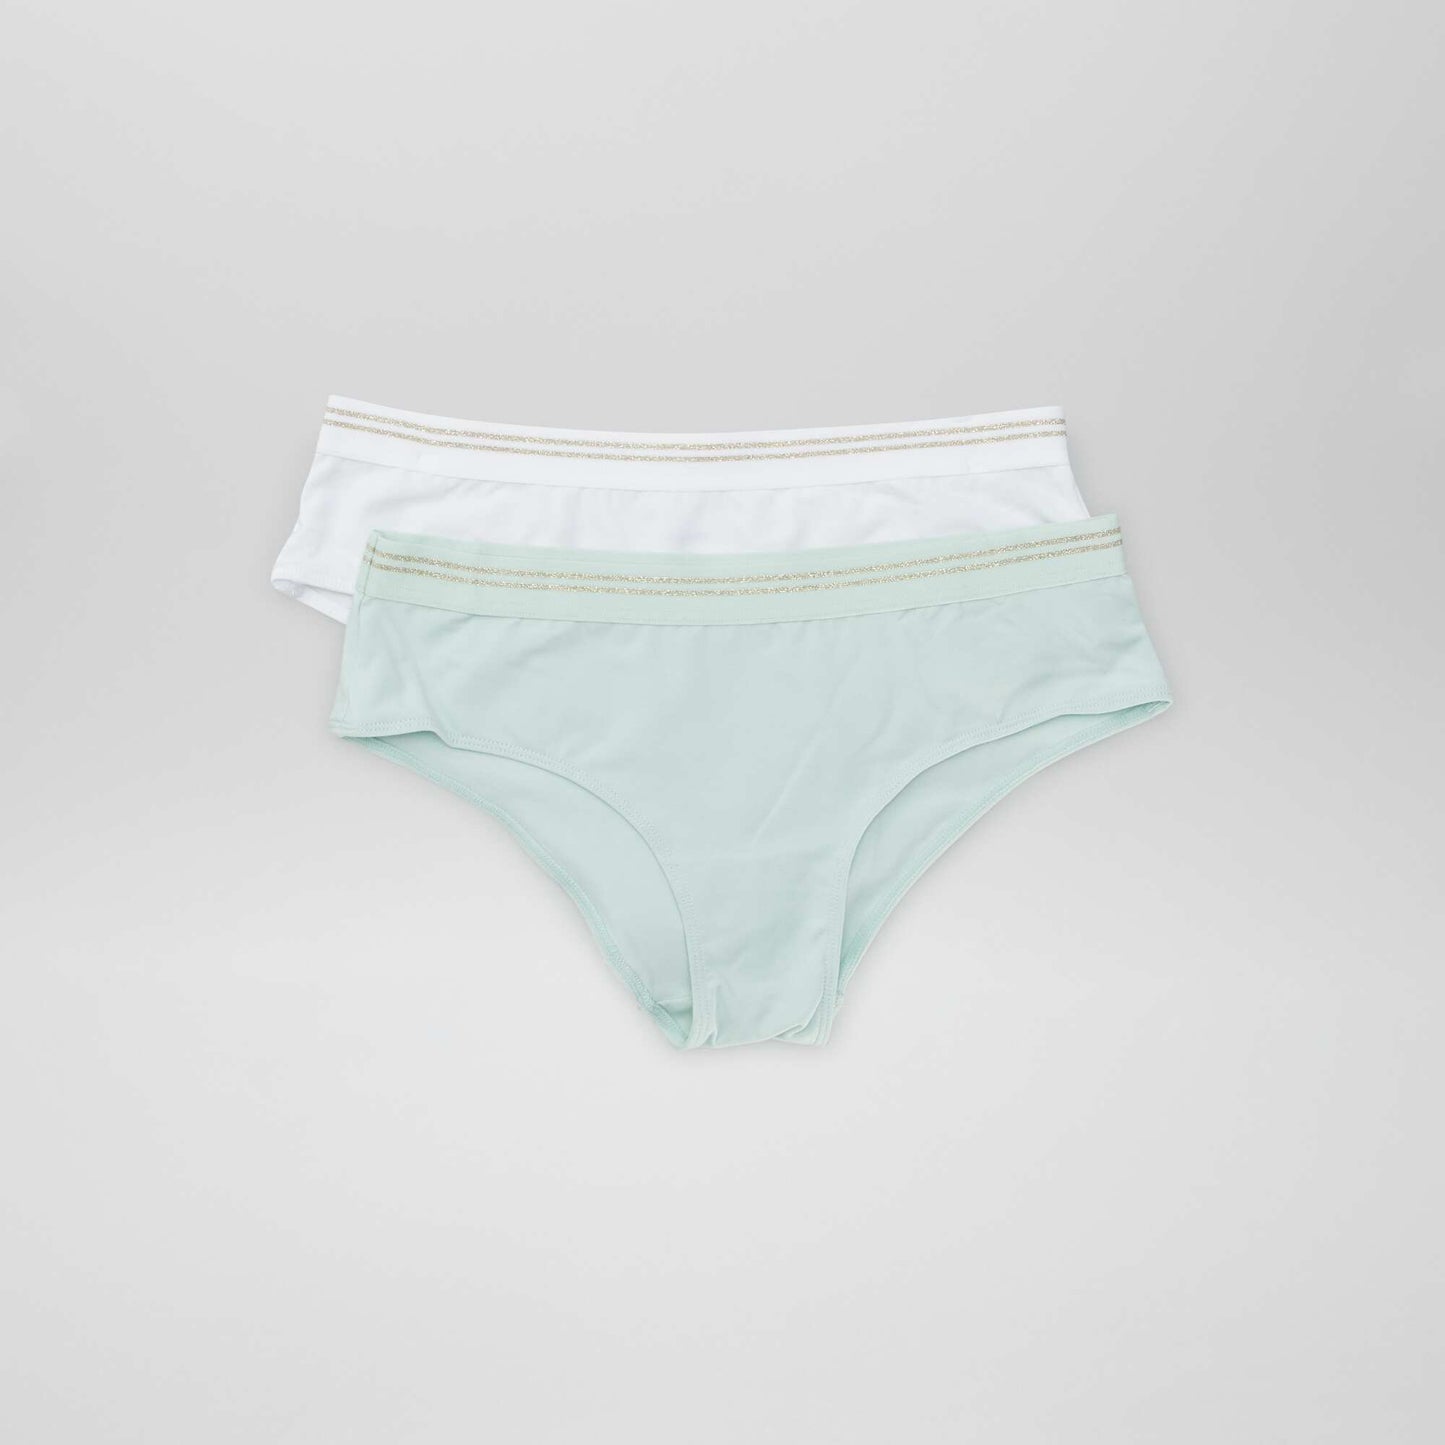 Pack of 2 cotton boy shorts white